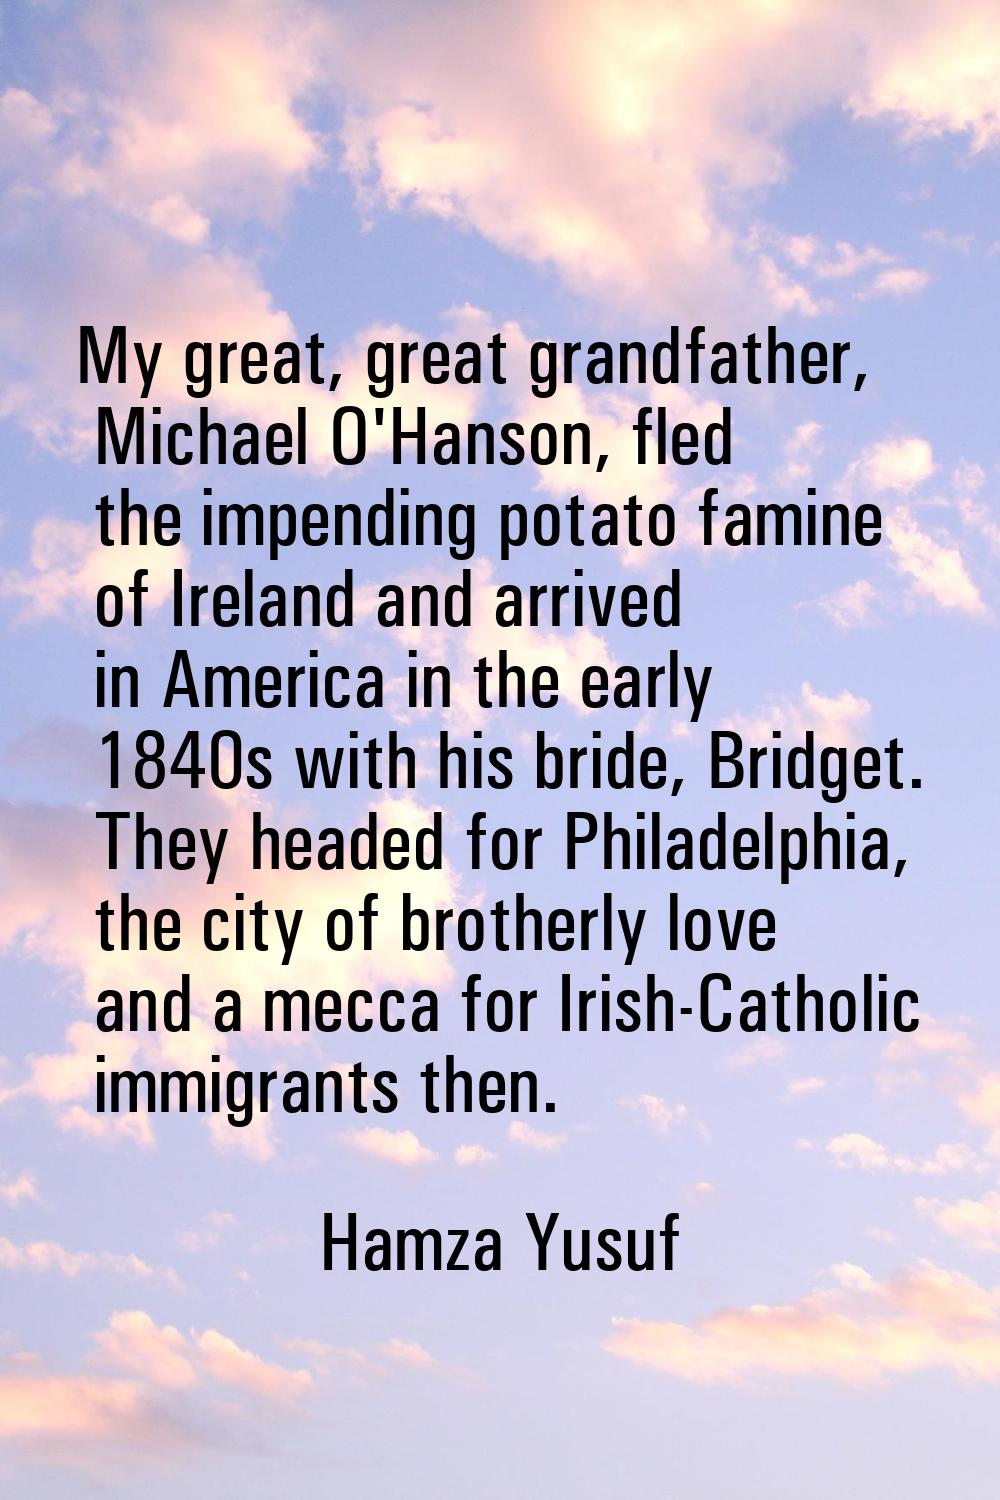 My great, great grandfather, Michael O'Hanson, fled the impending potato famine of Ireland and arri